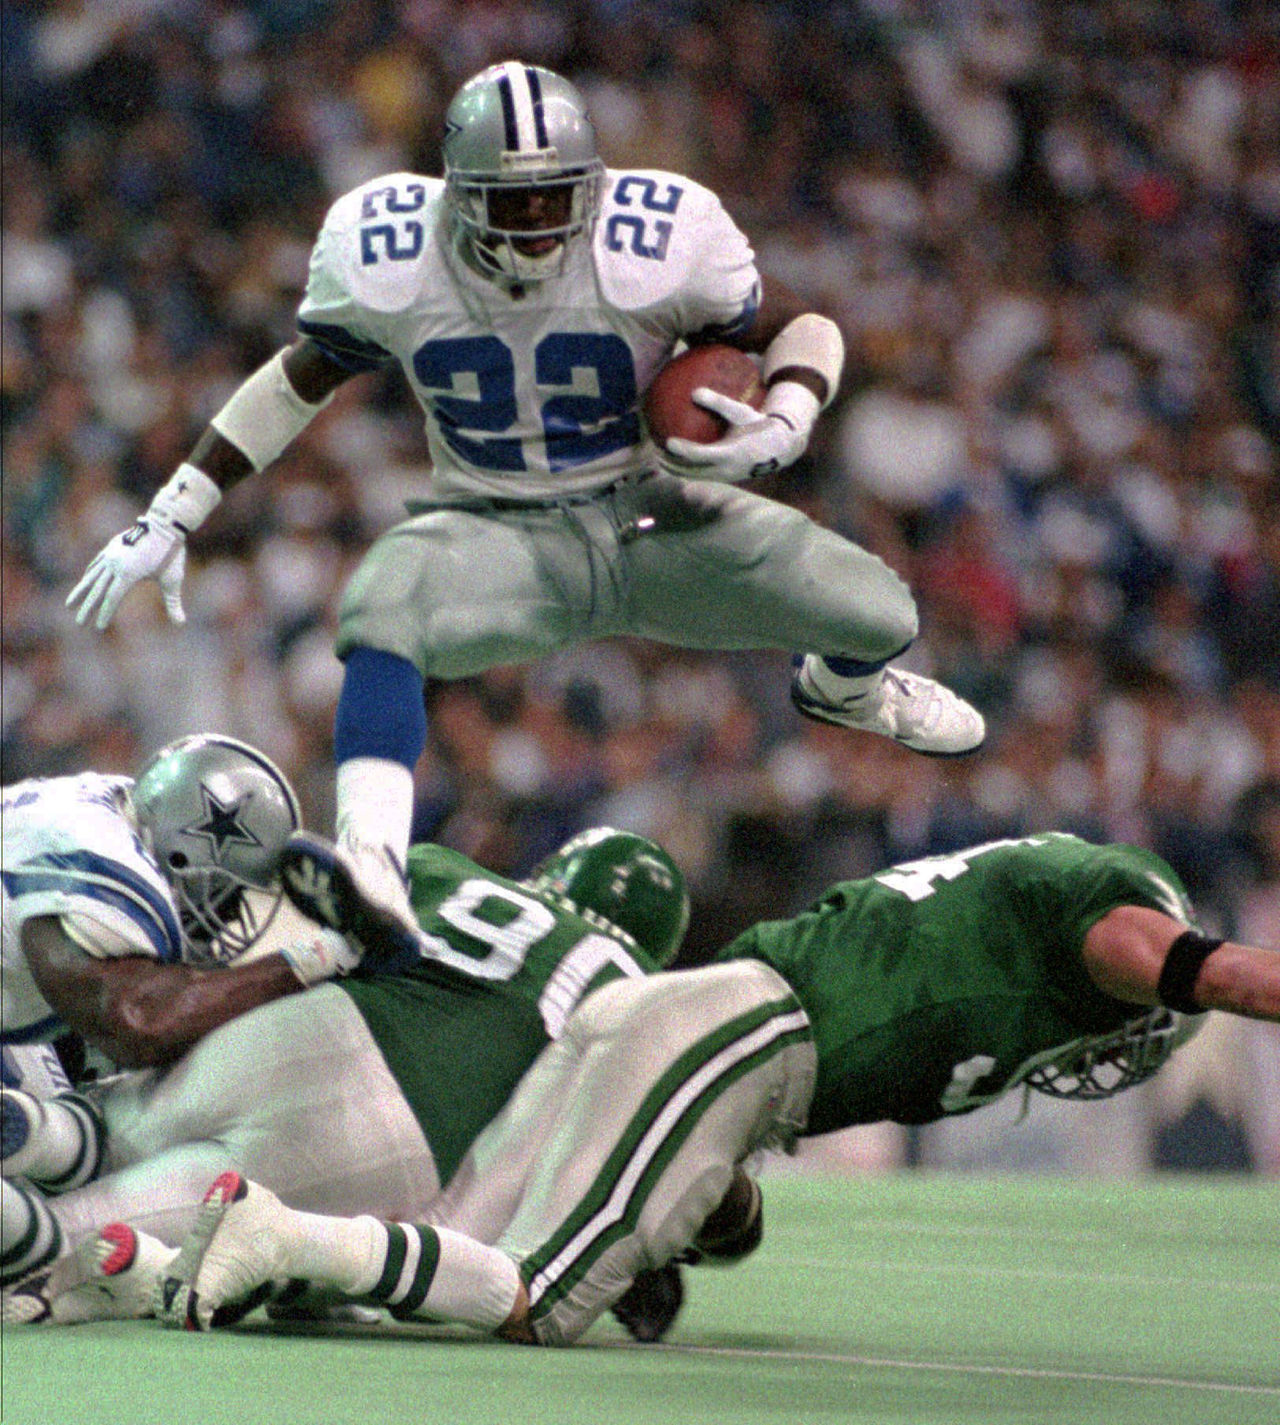 Cowboys Blog - Cowboys CTK: The Legend of 22, From Bob Hayes To Emmitt Smith 7